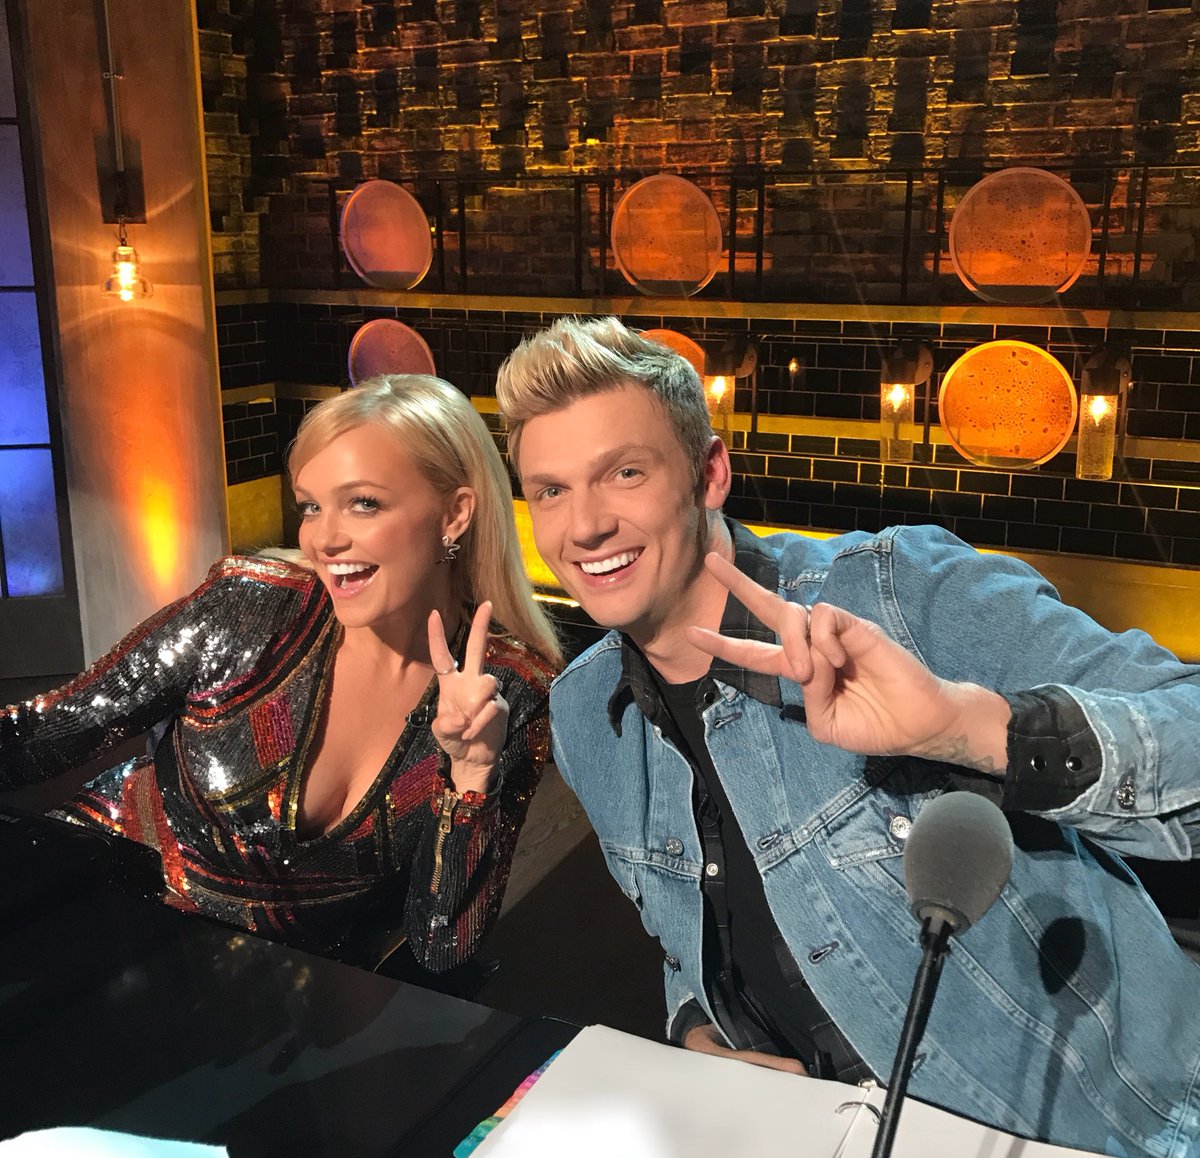 RT @nickcarter: Spice up your life ✌️ https://t.co/rX6HxdHzWa